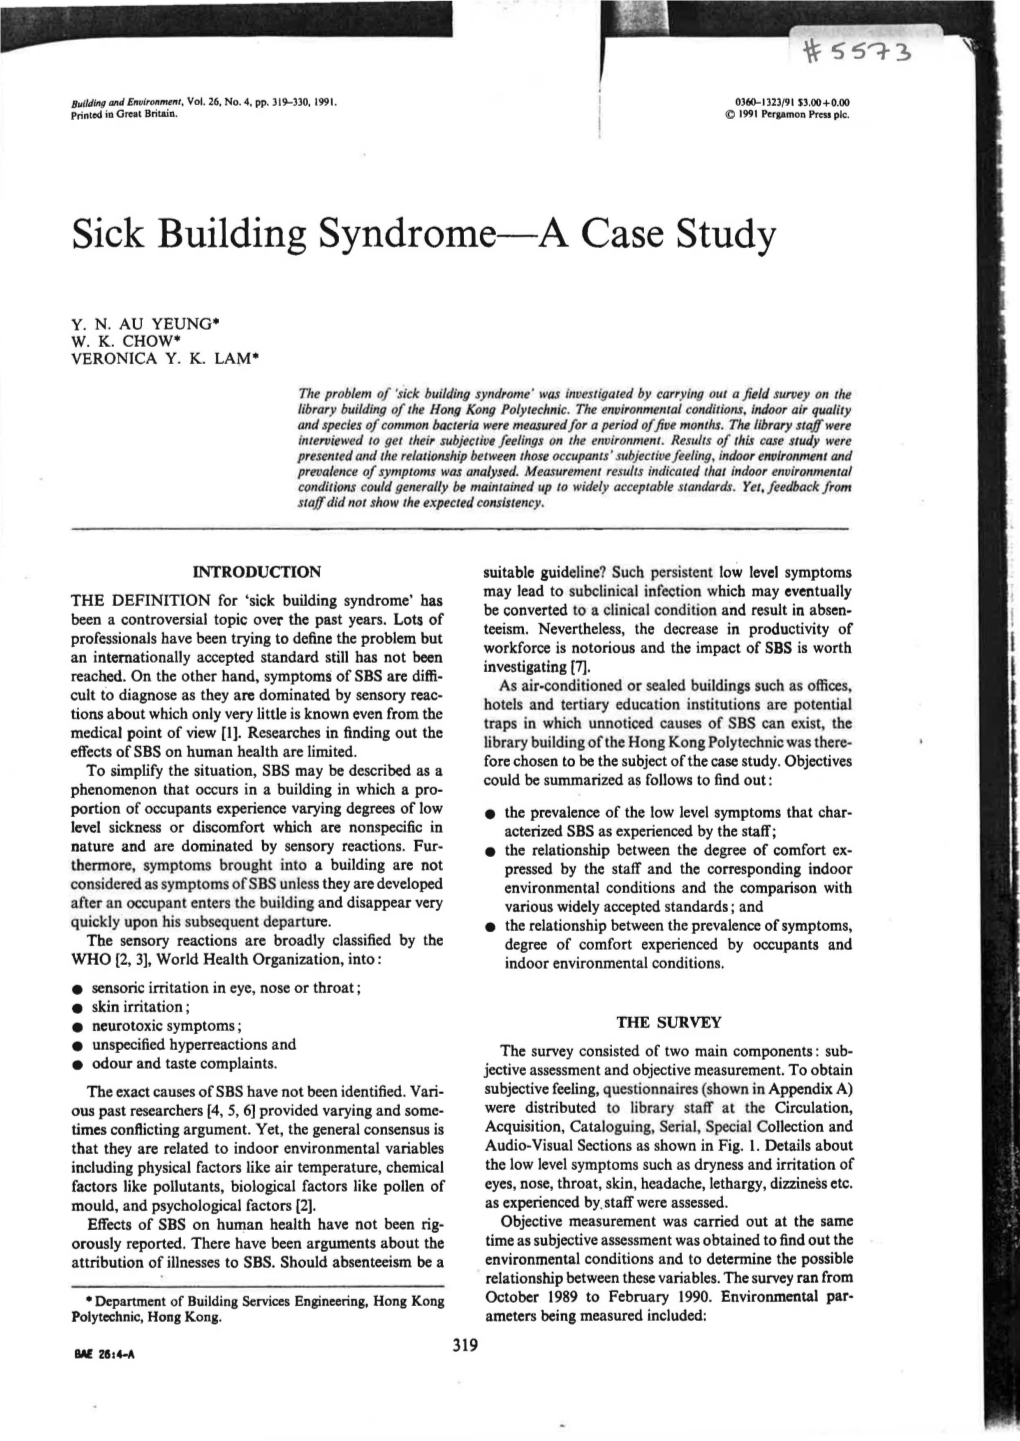 Sick Building Syndrome-A Case Study